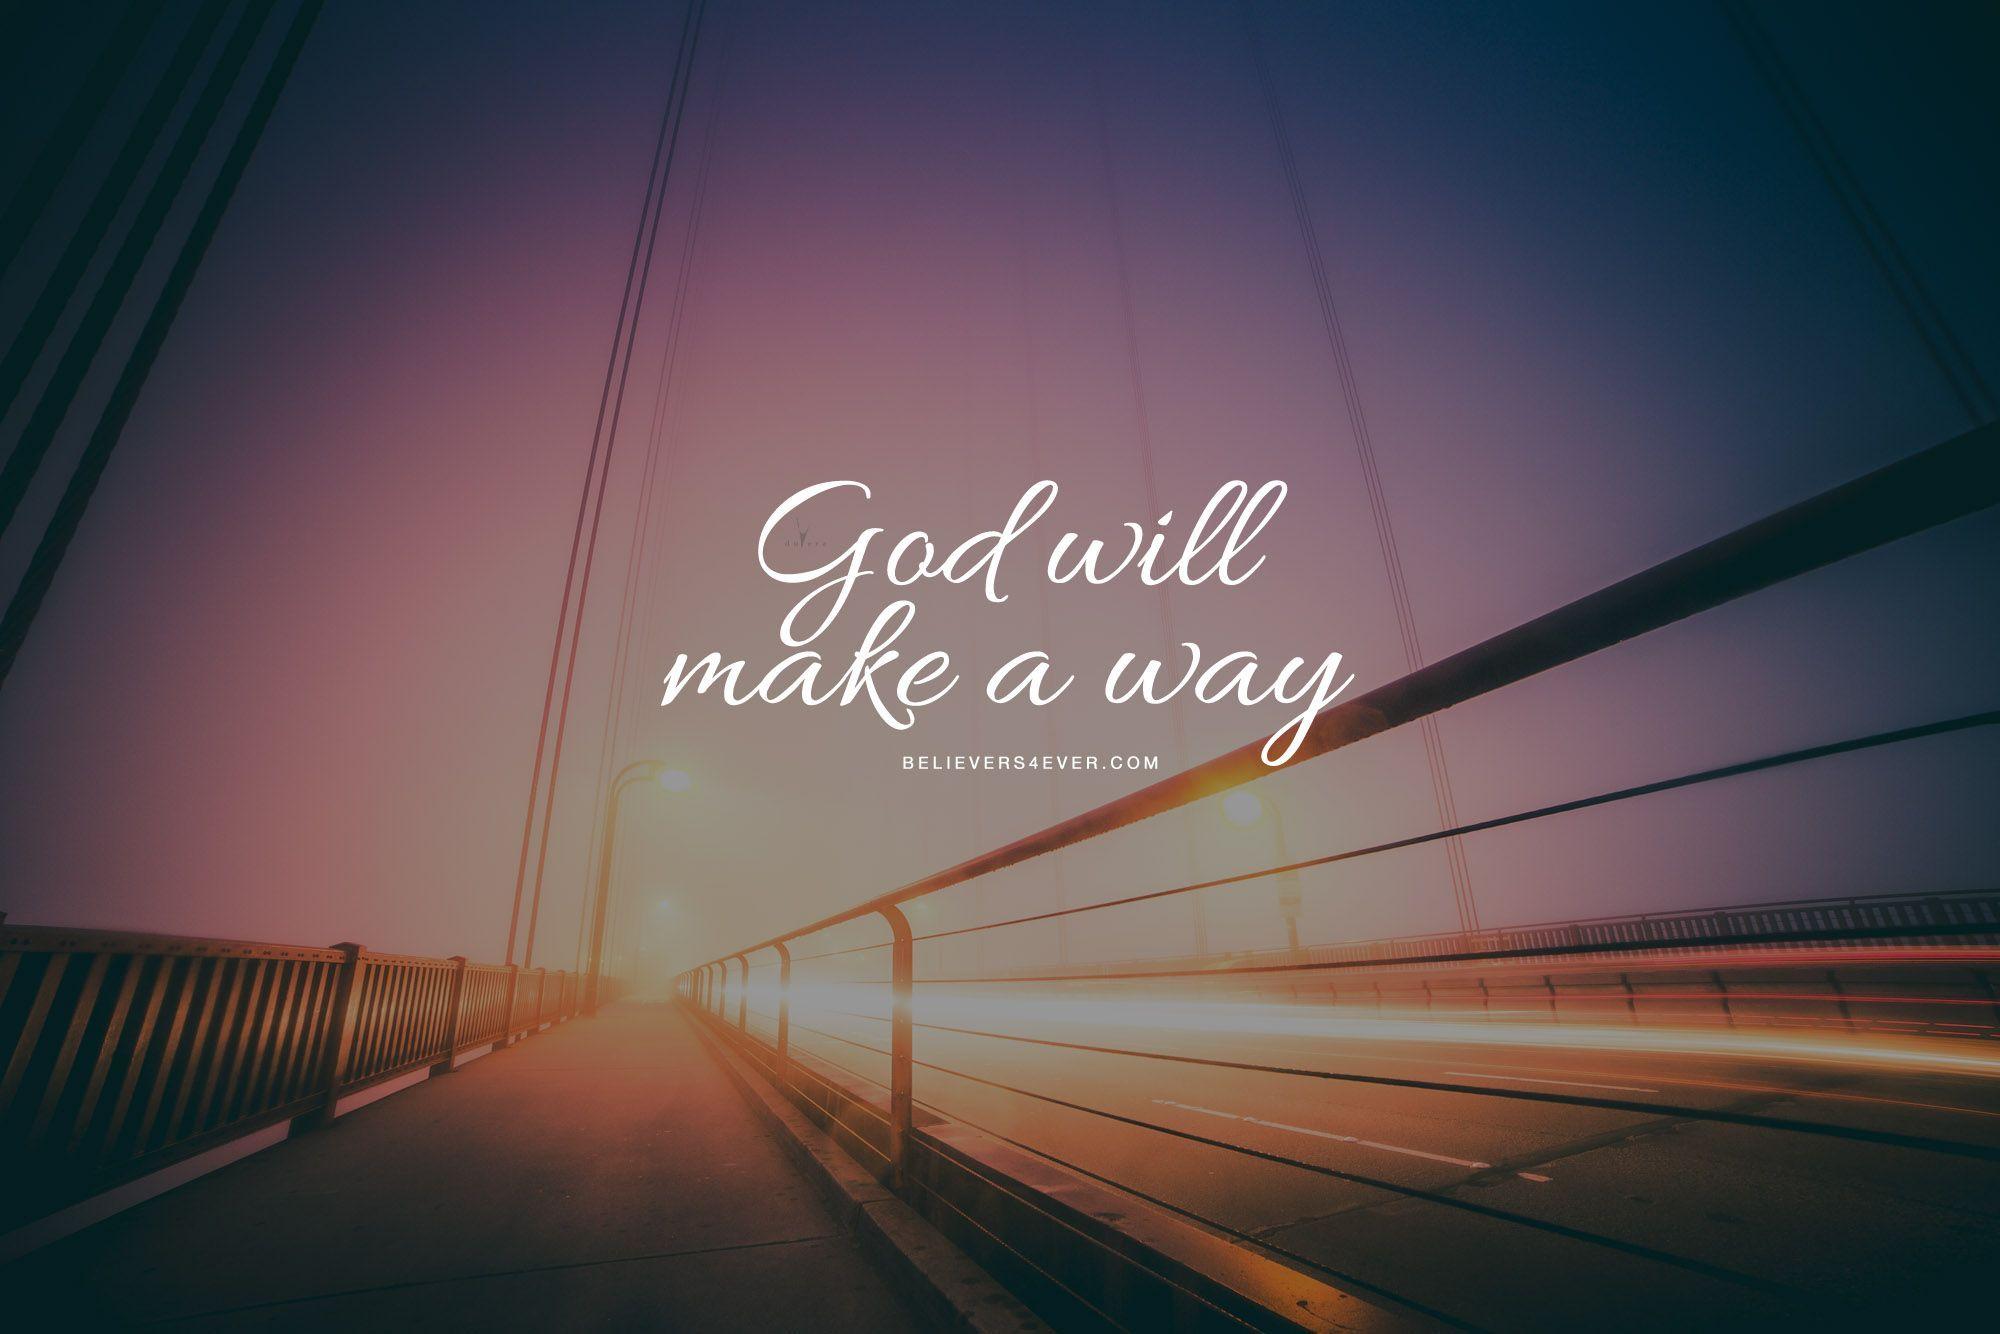 God will make a way. Desktop wallpaper quotes, Christian quotes